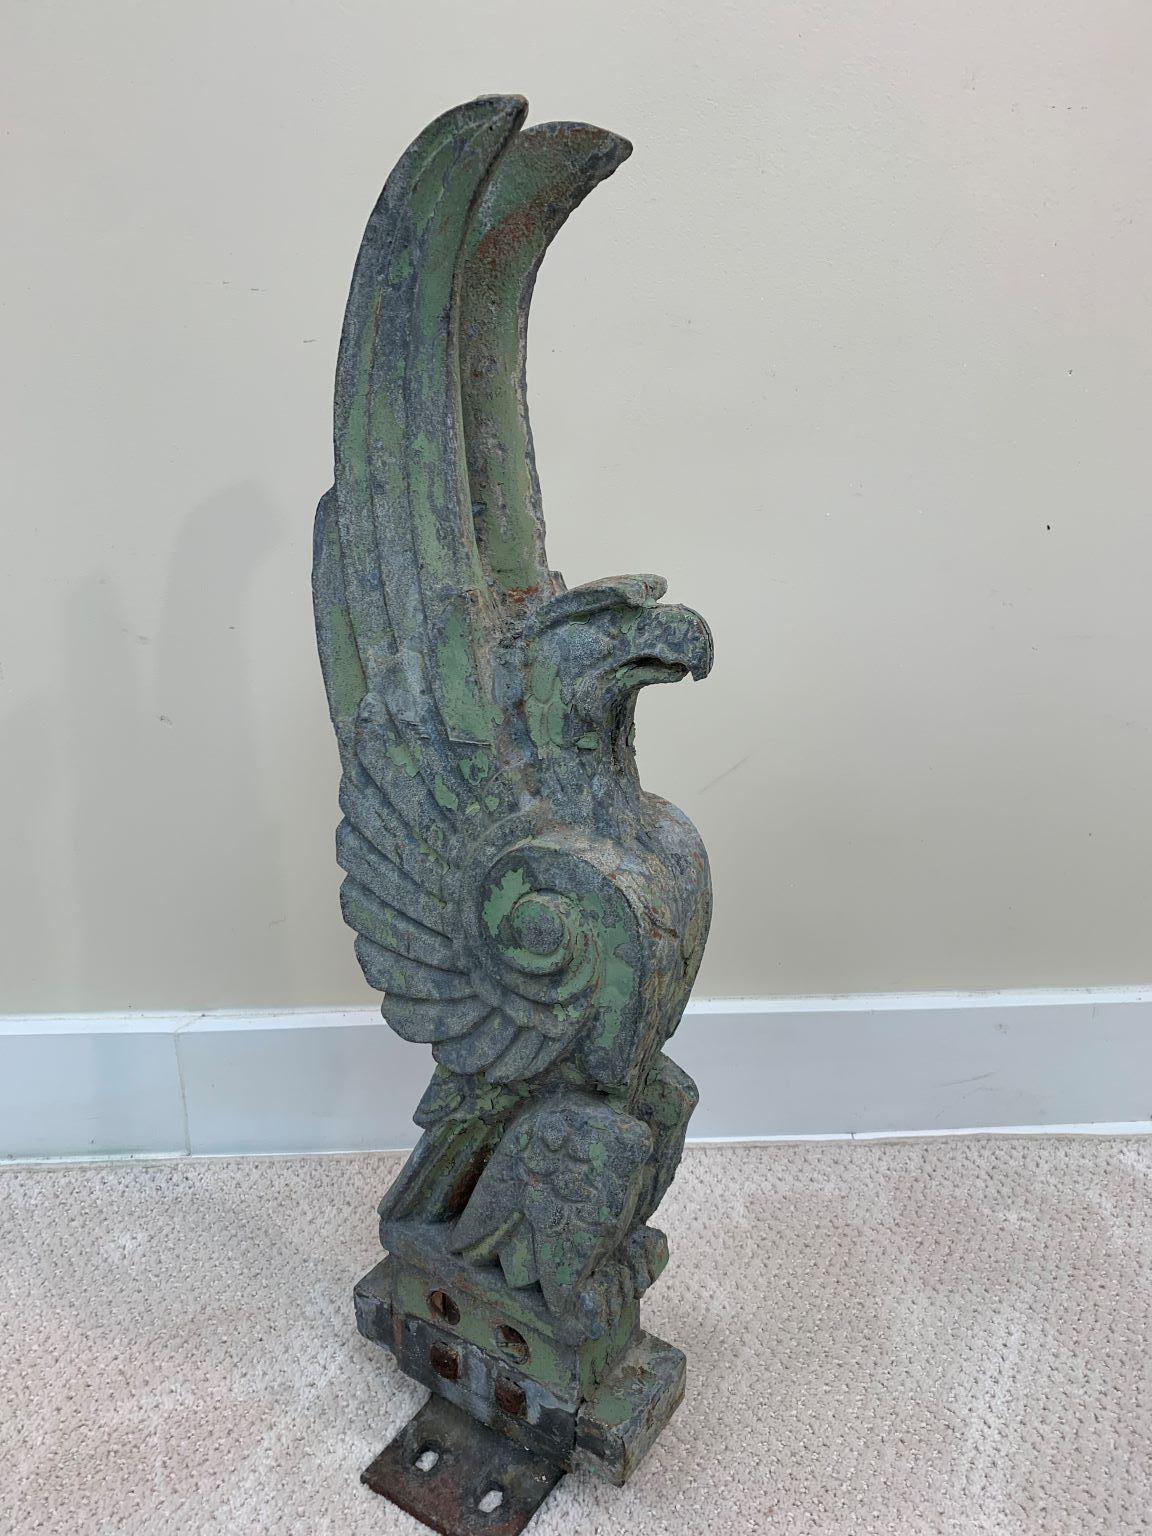 An incredibly rare Art Deco galvanized over iron sculptural eagle. This eagle most likely was mounted on a column of a bridge or possibly a building. It has been painted over the years but is still in very good condition. It has phenomenal Art Deco